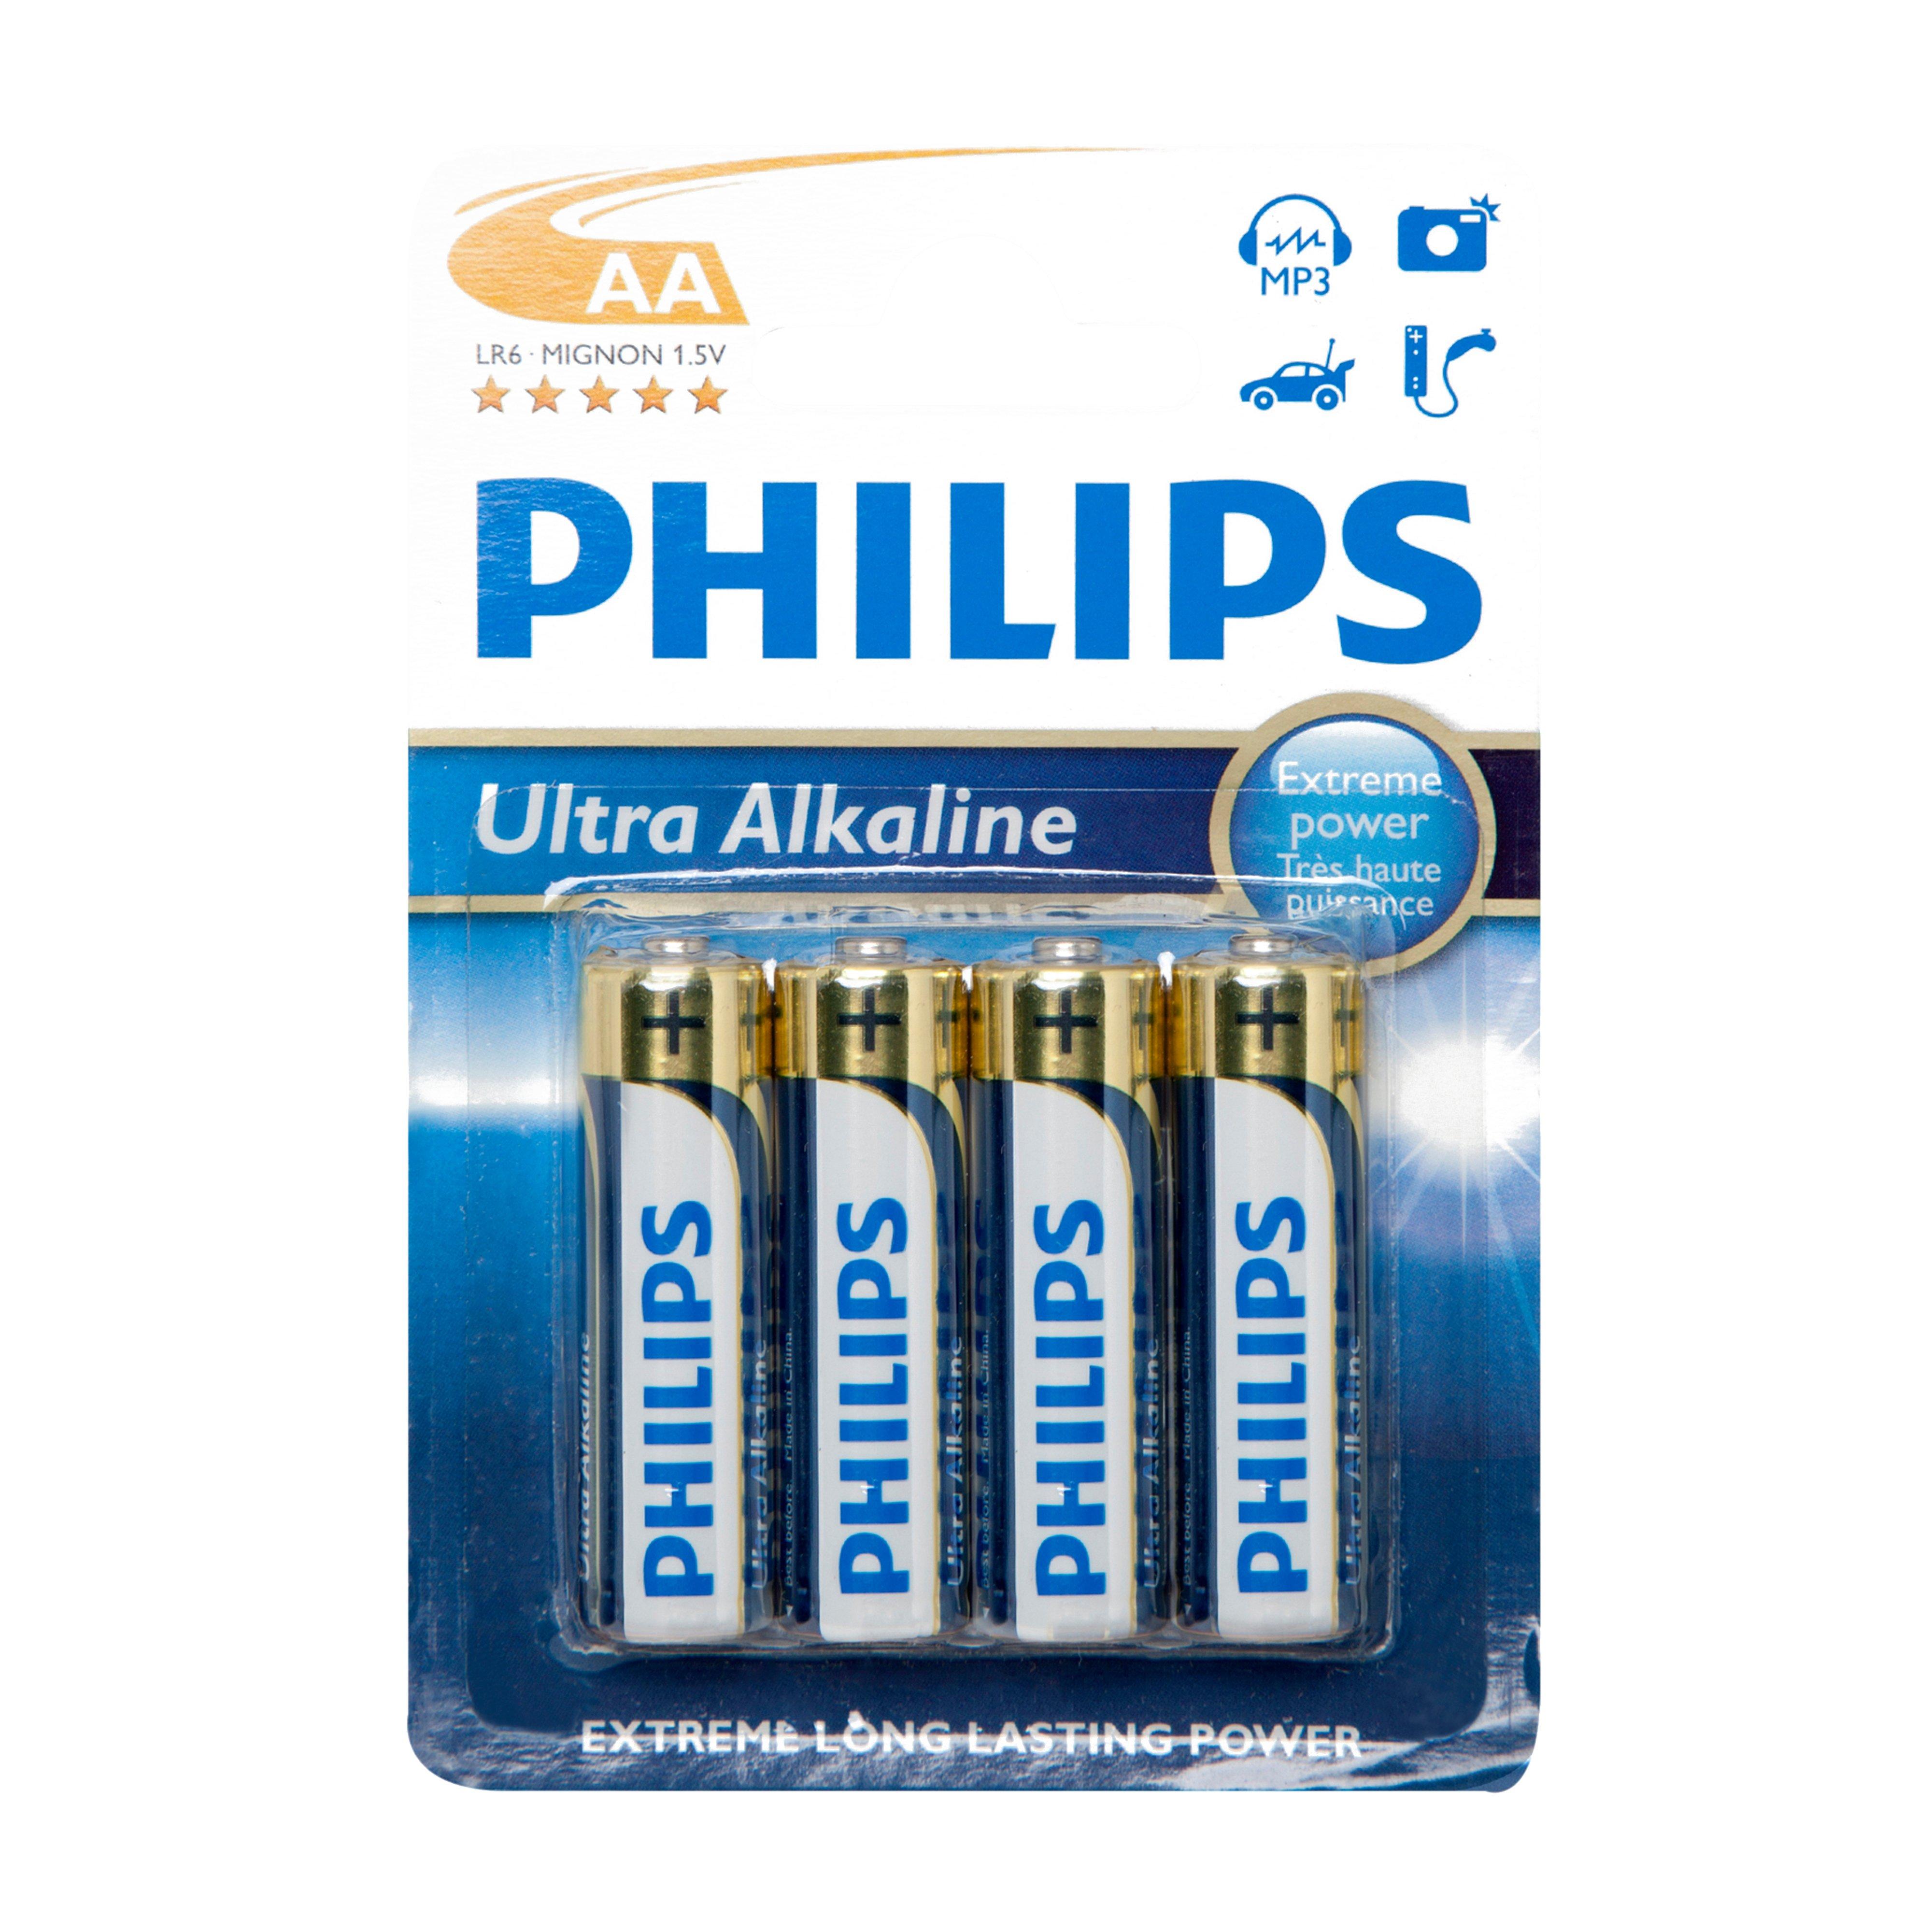 Phillips Ultra Alkaline AA Batteries 4 Pack Review